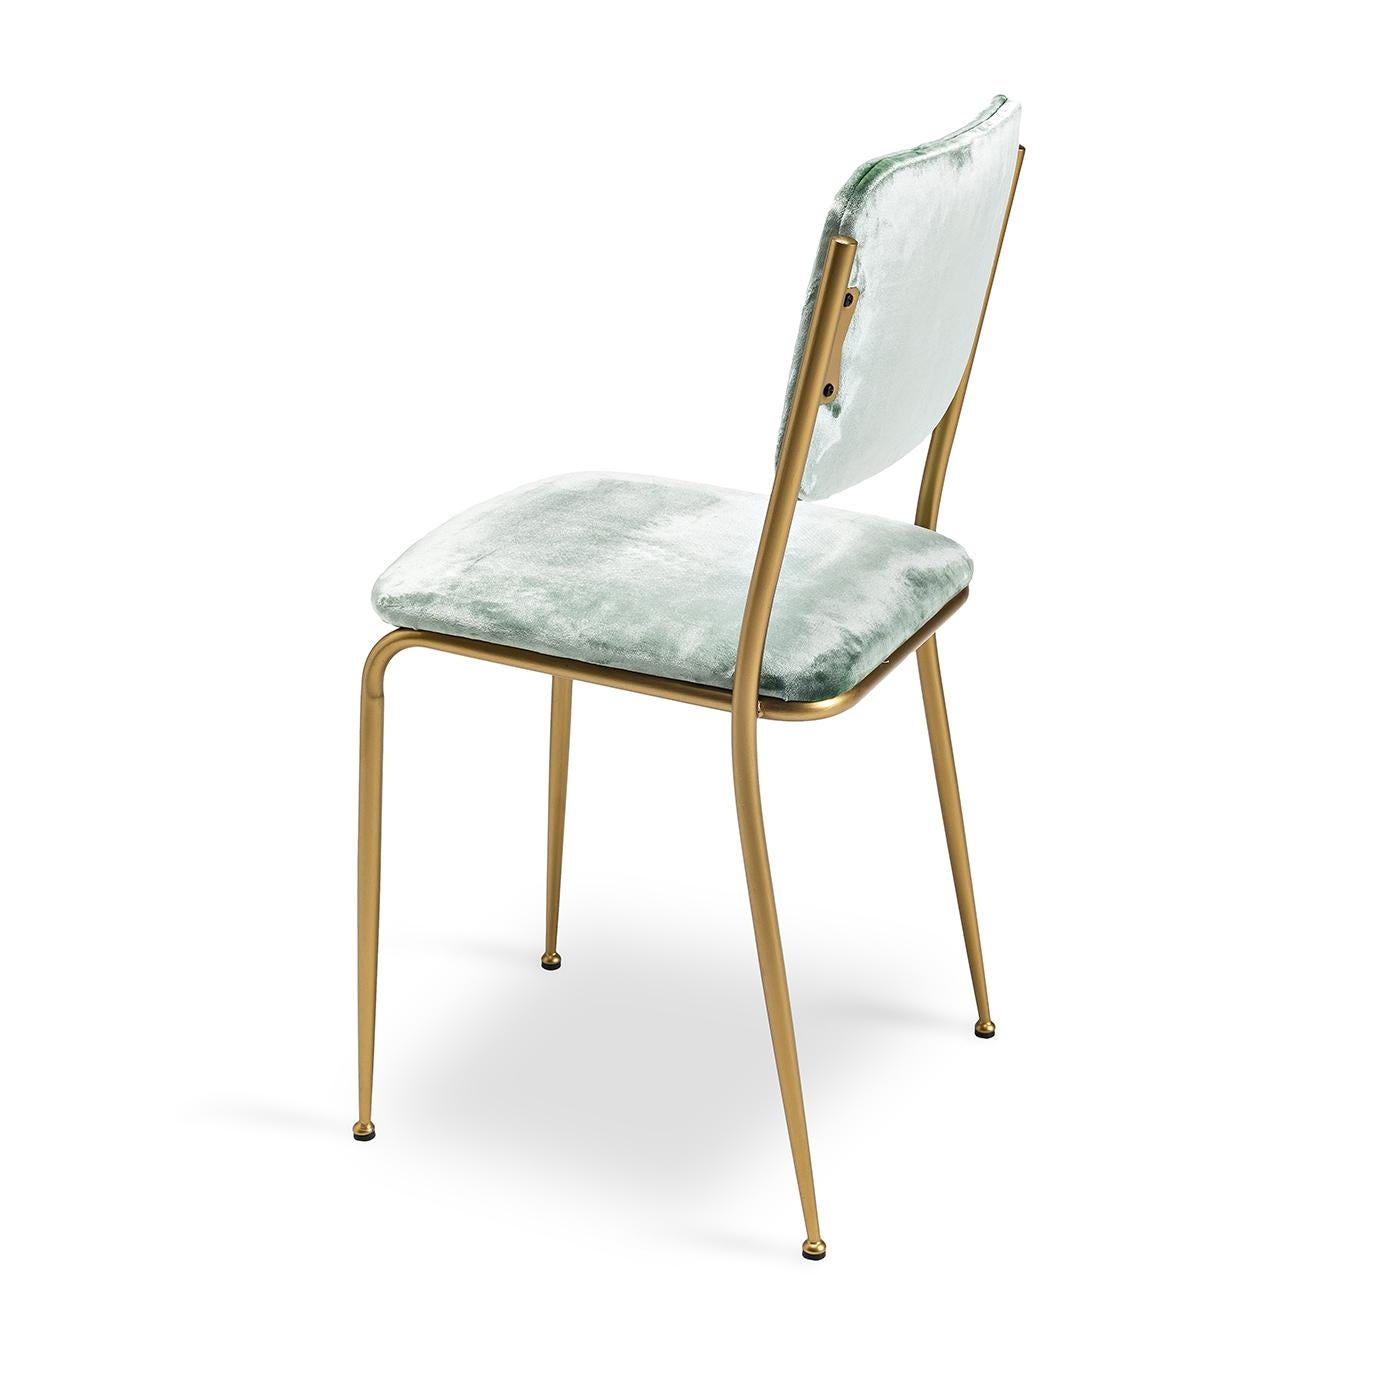 This cute vintage-inspired dining chair will add a bit of charm to any dining room. This chair’s seat and back are upholstered in light green velvet, while the back and seat are structured with polyurethane and curved wood inserts. The simple metal